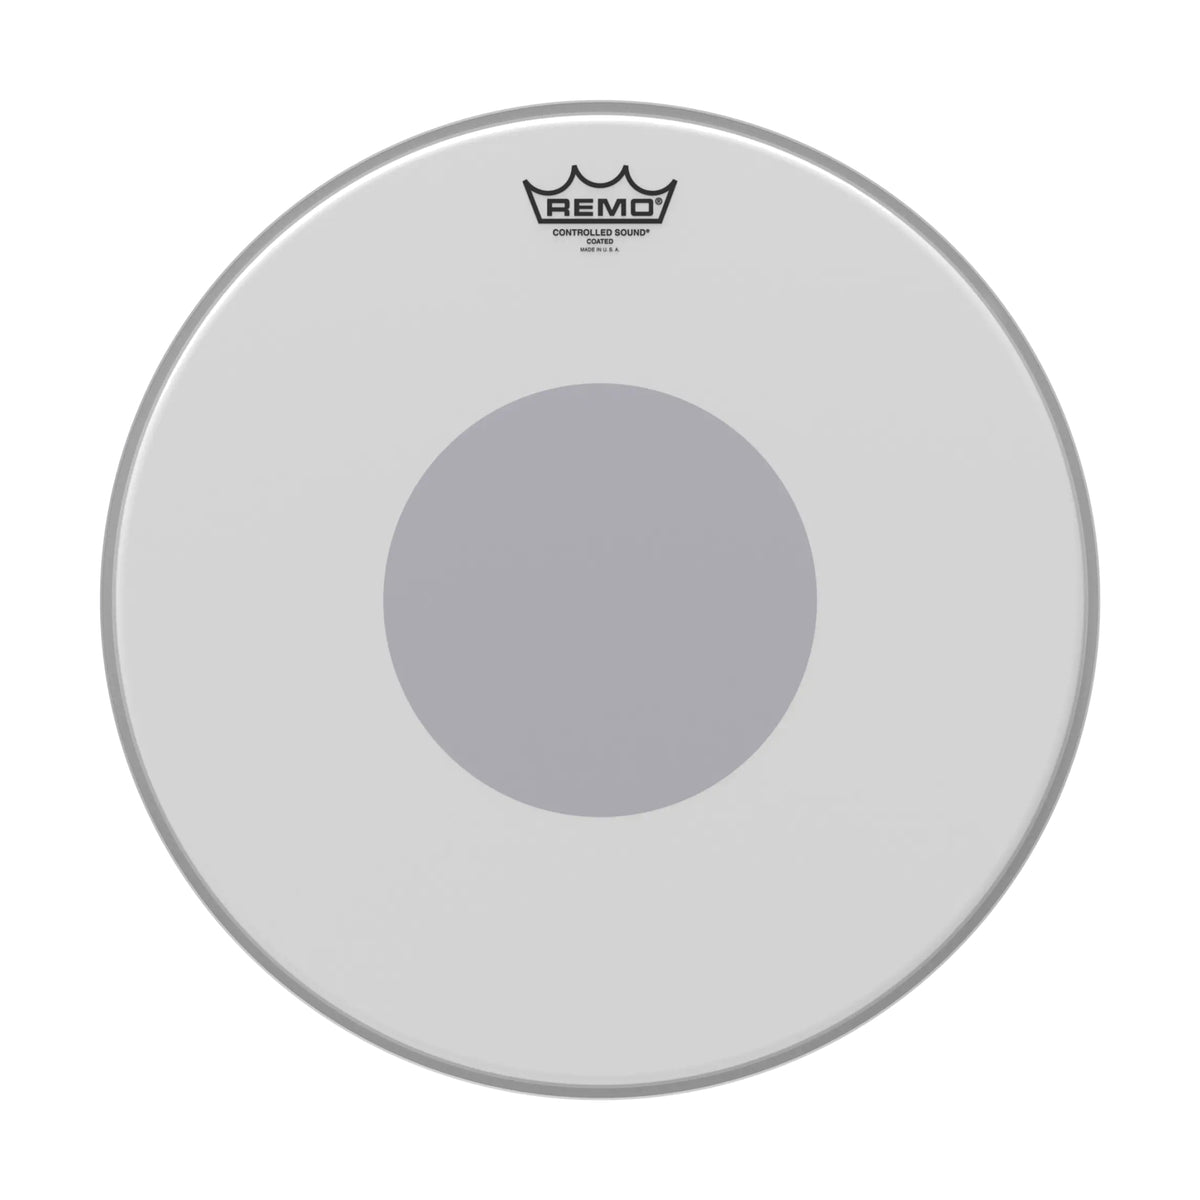 Remo Controlled Sound 16 Inch Drum Head